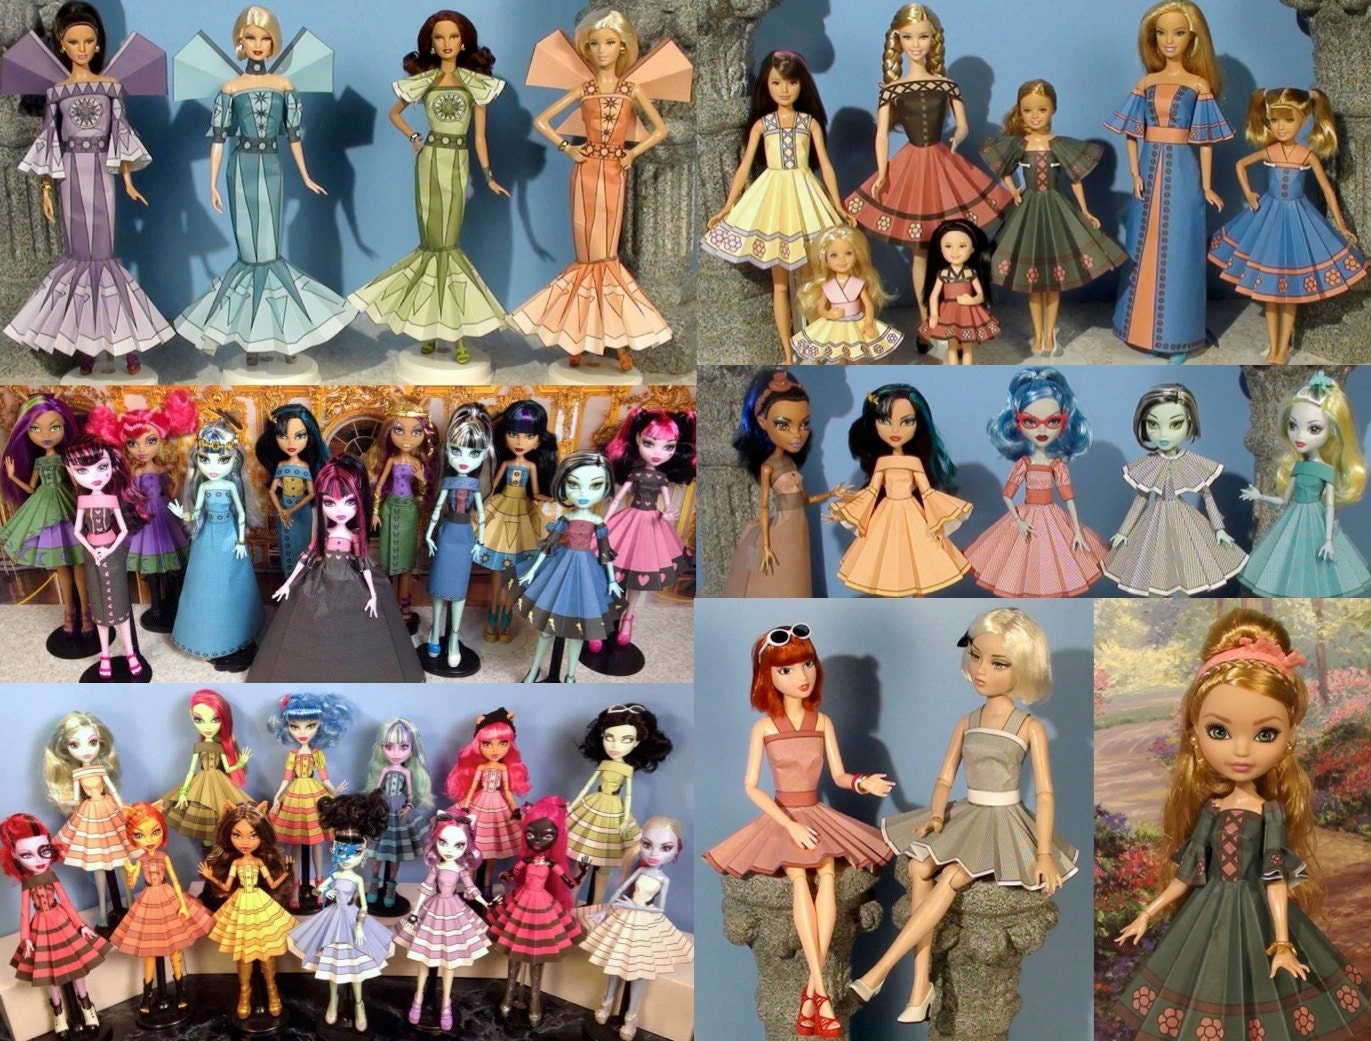 Printable Doll Clothes Volume 2 - Printable Paper Dresses that fit Barbie, Monster High, Ever After High and more